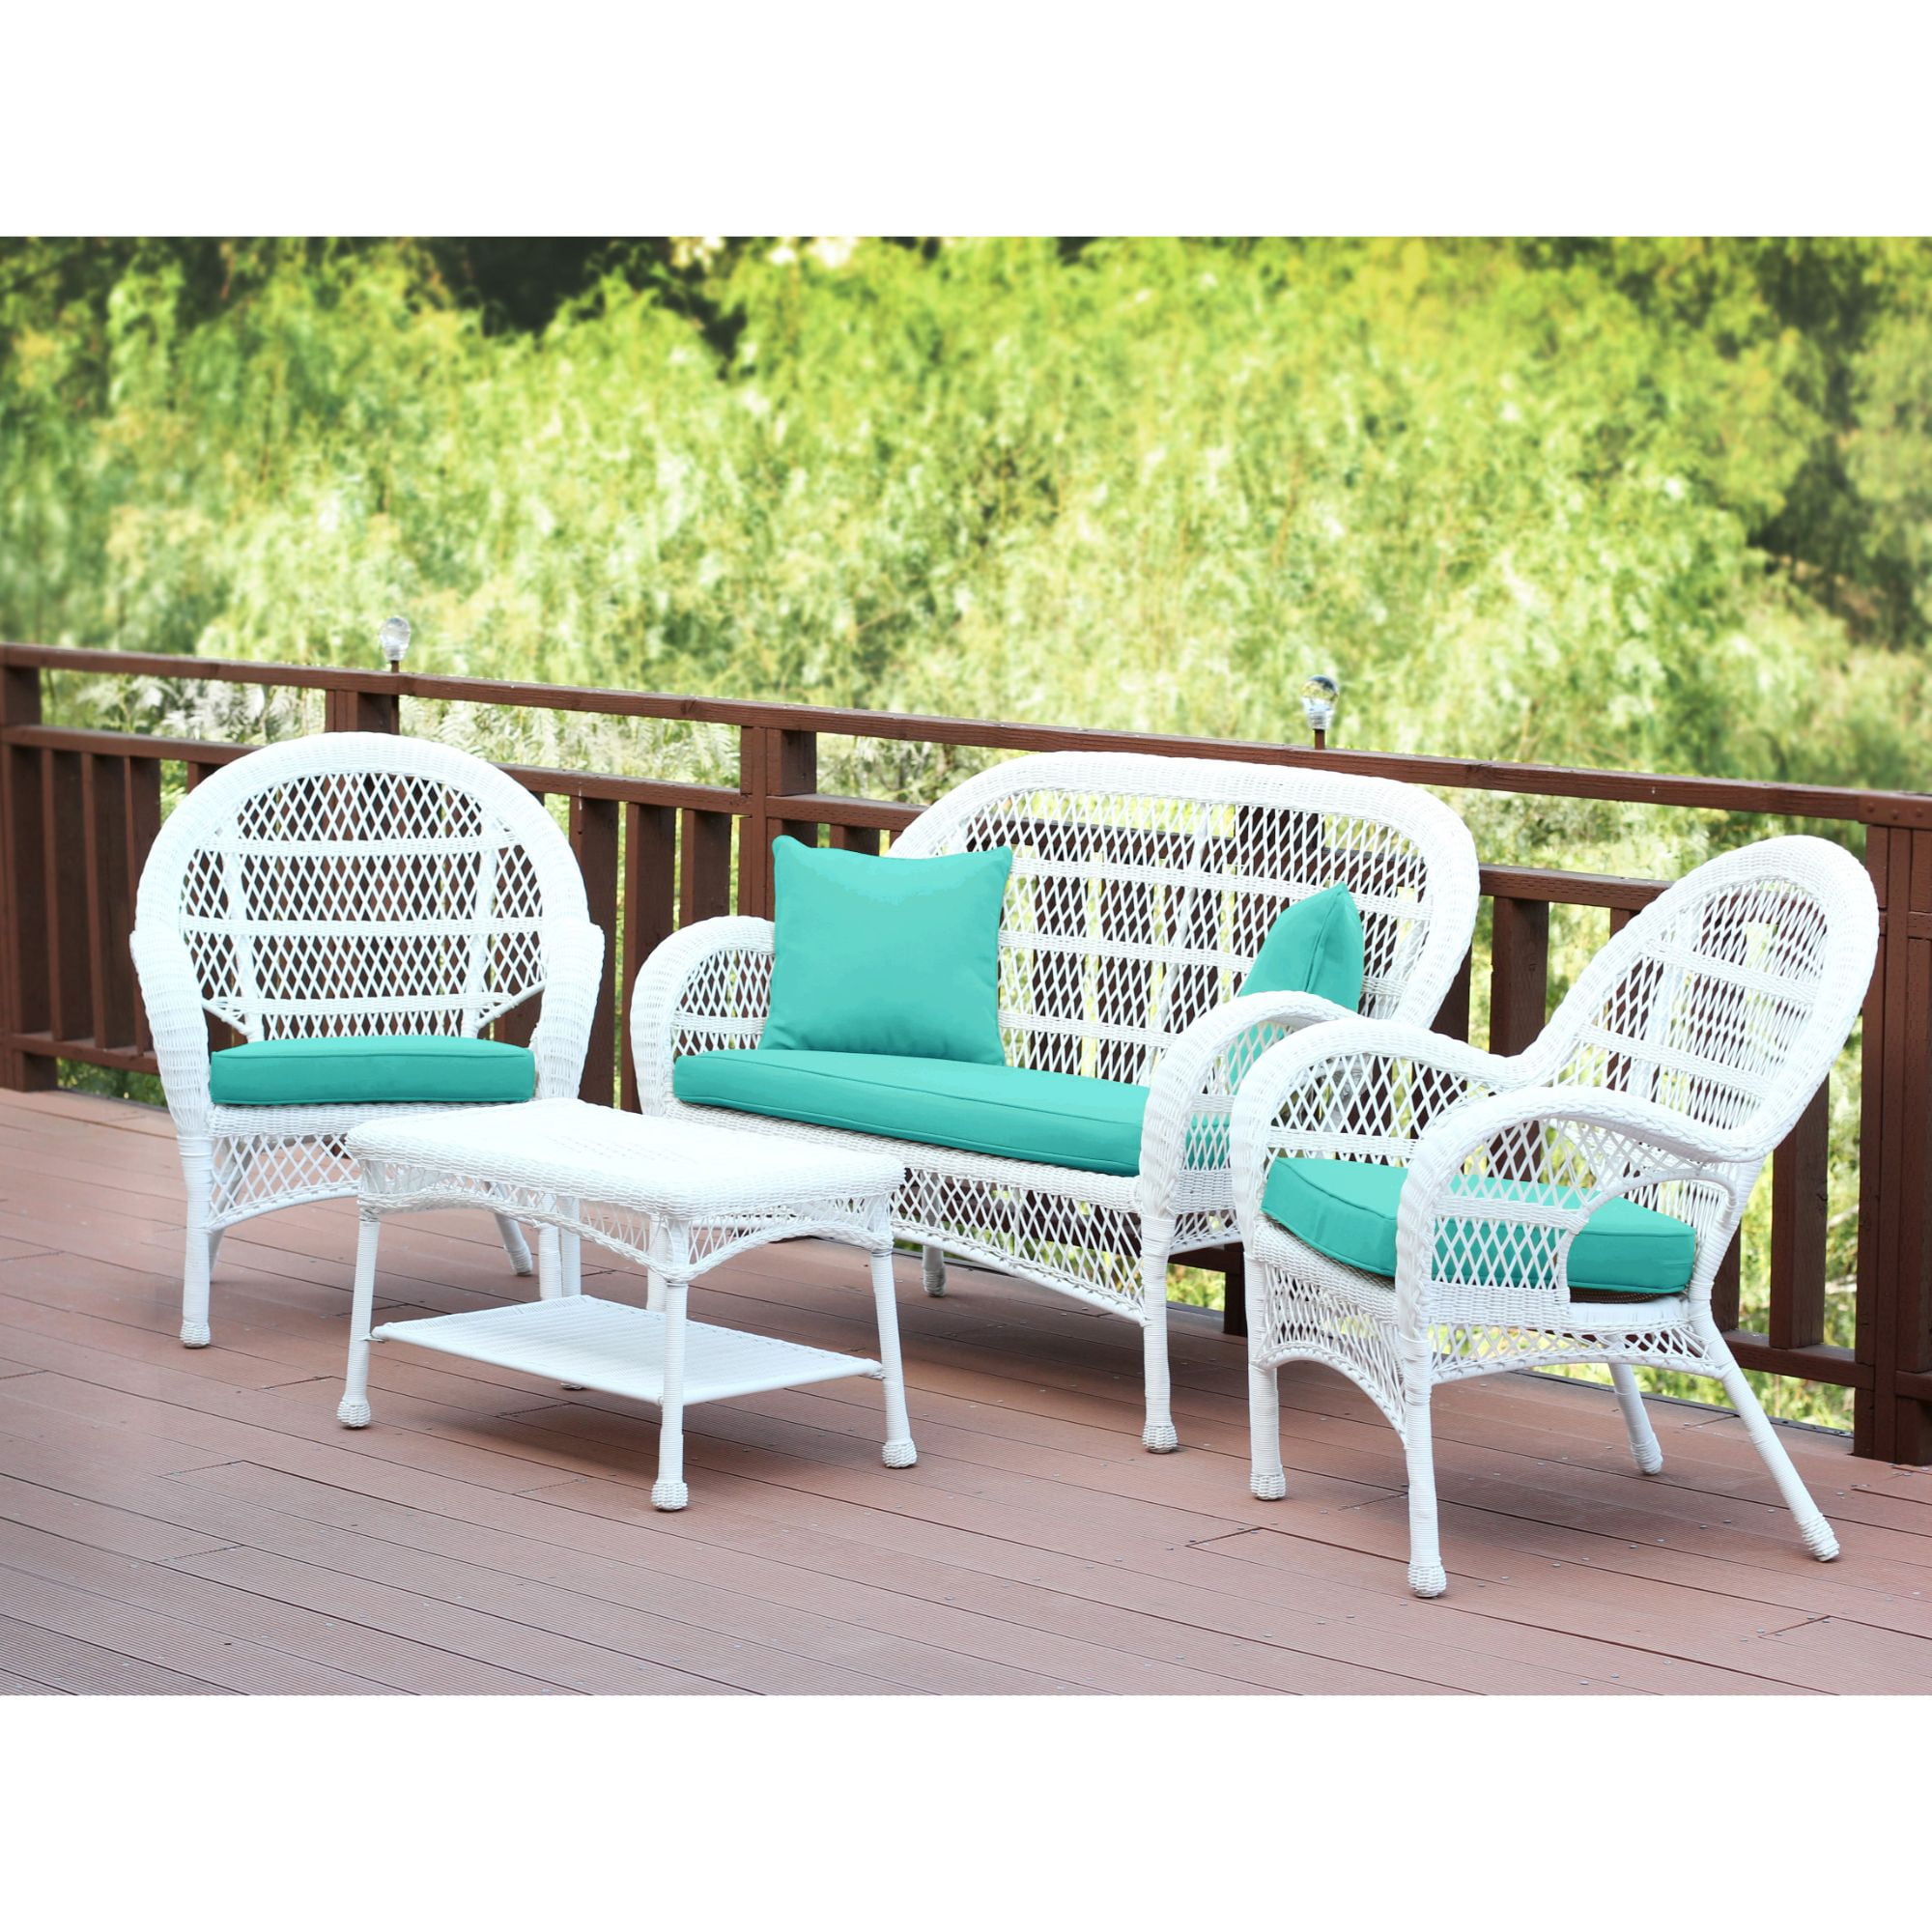 White Resin Wicker Patio Furniture Clearance White Resin Wicker Outdoor 2 Seat Loveseat Glider 